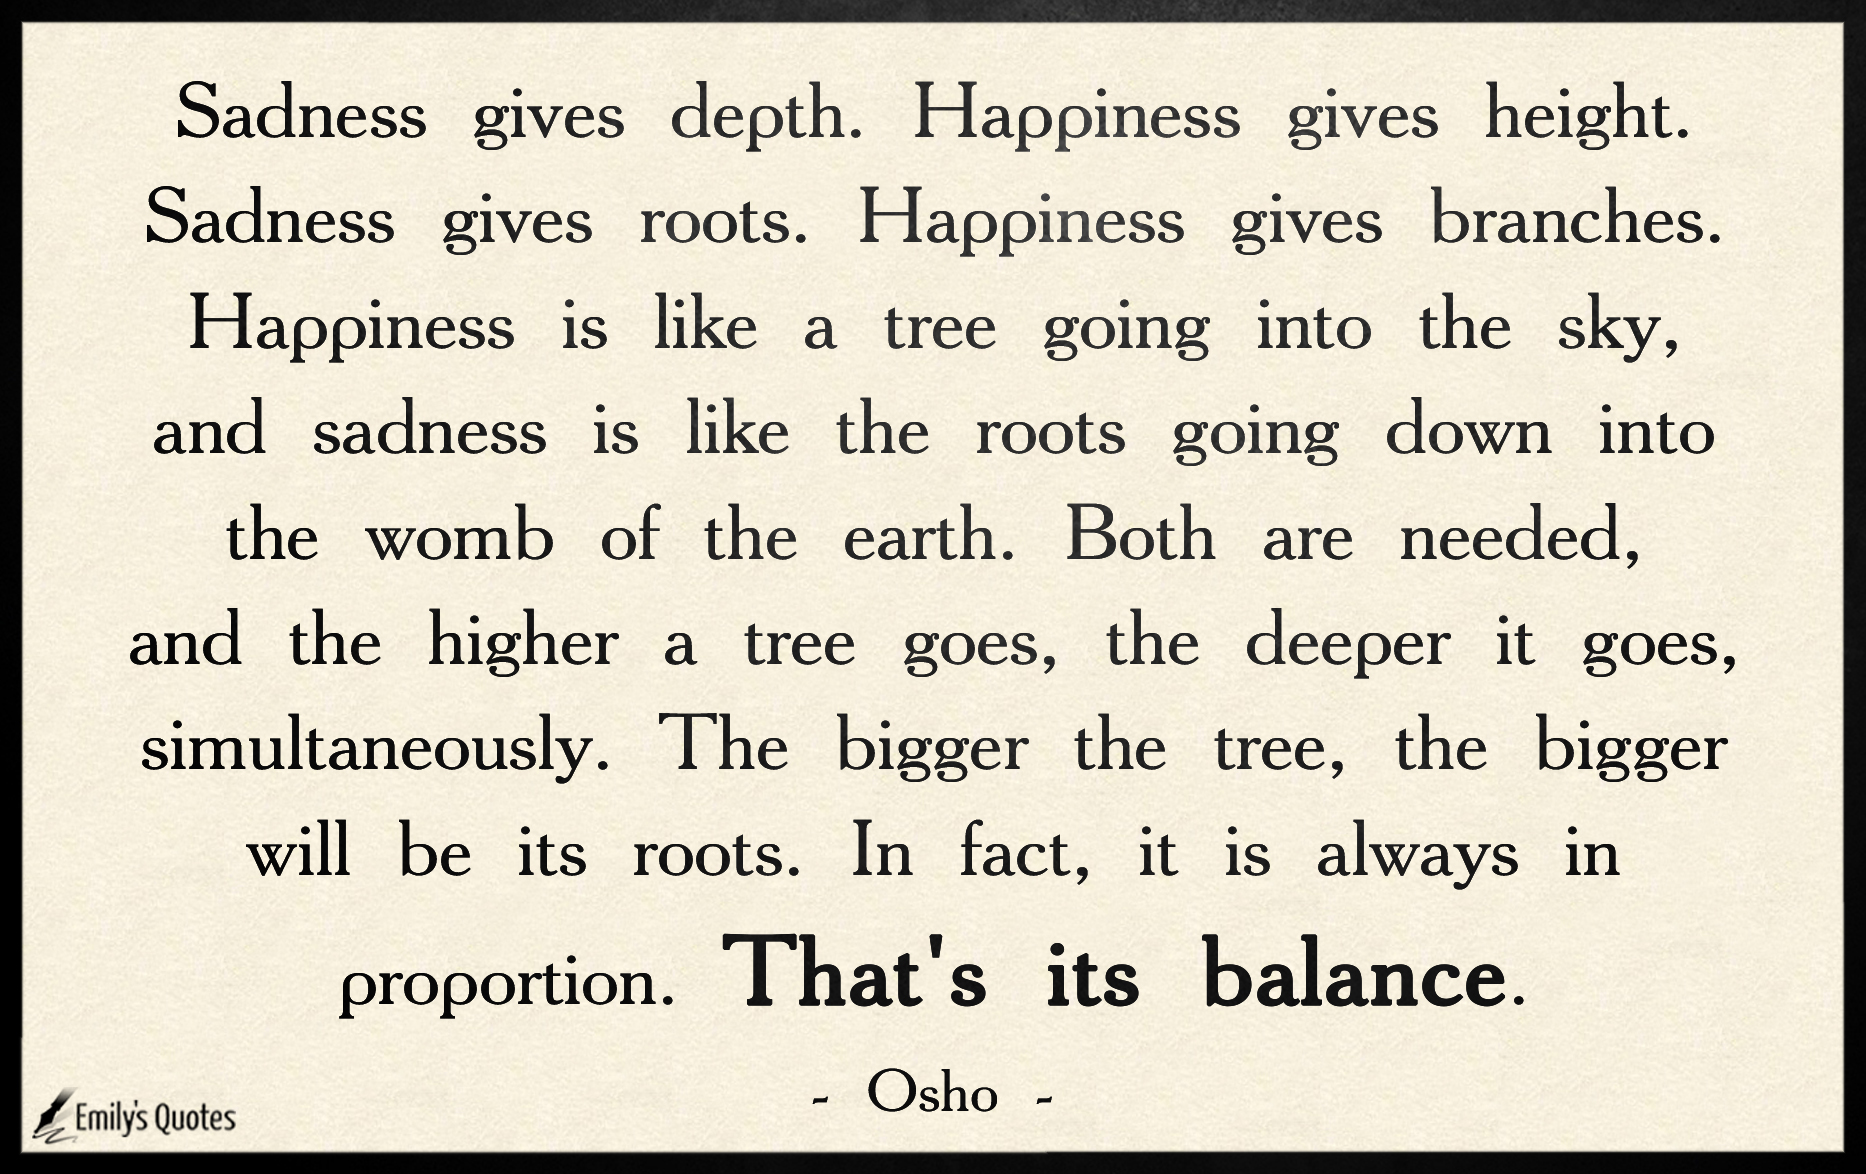 Sadness gives depth. Happiness gives height. Sadness gives roots. Happiness